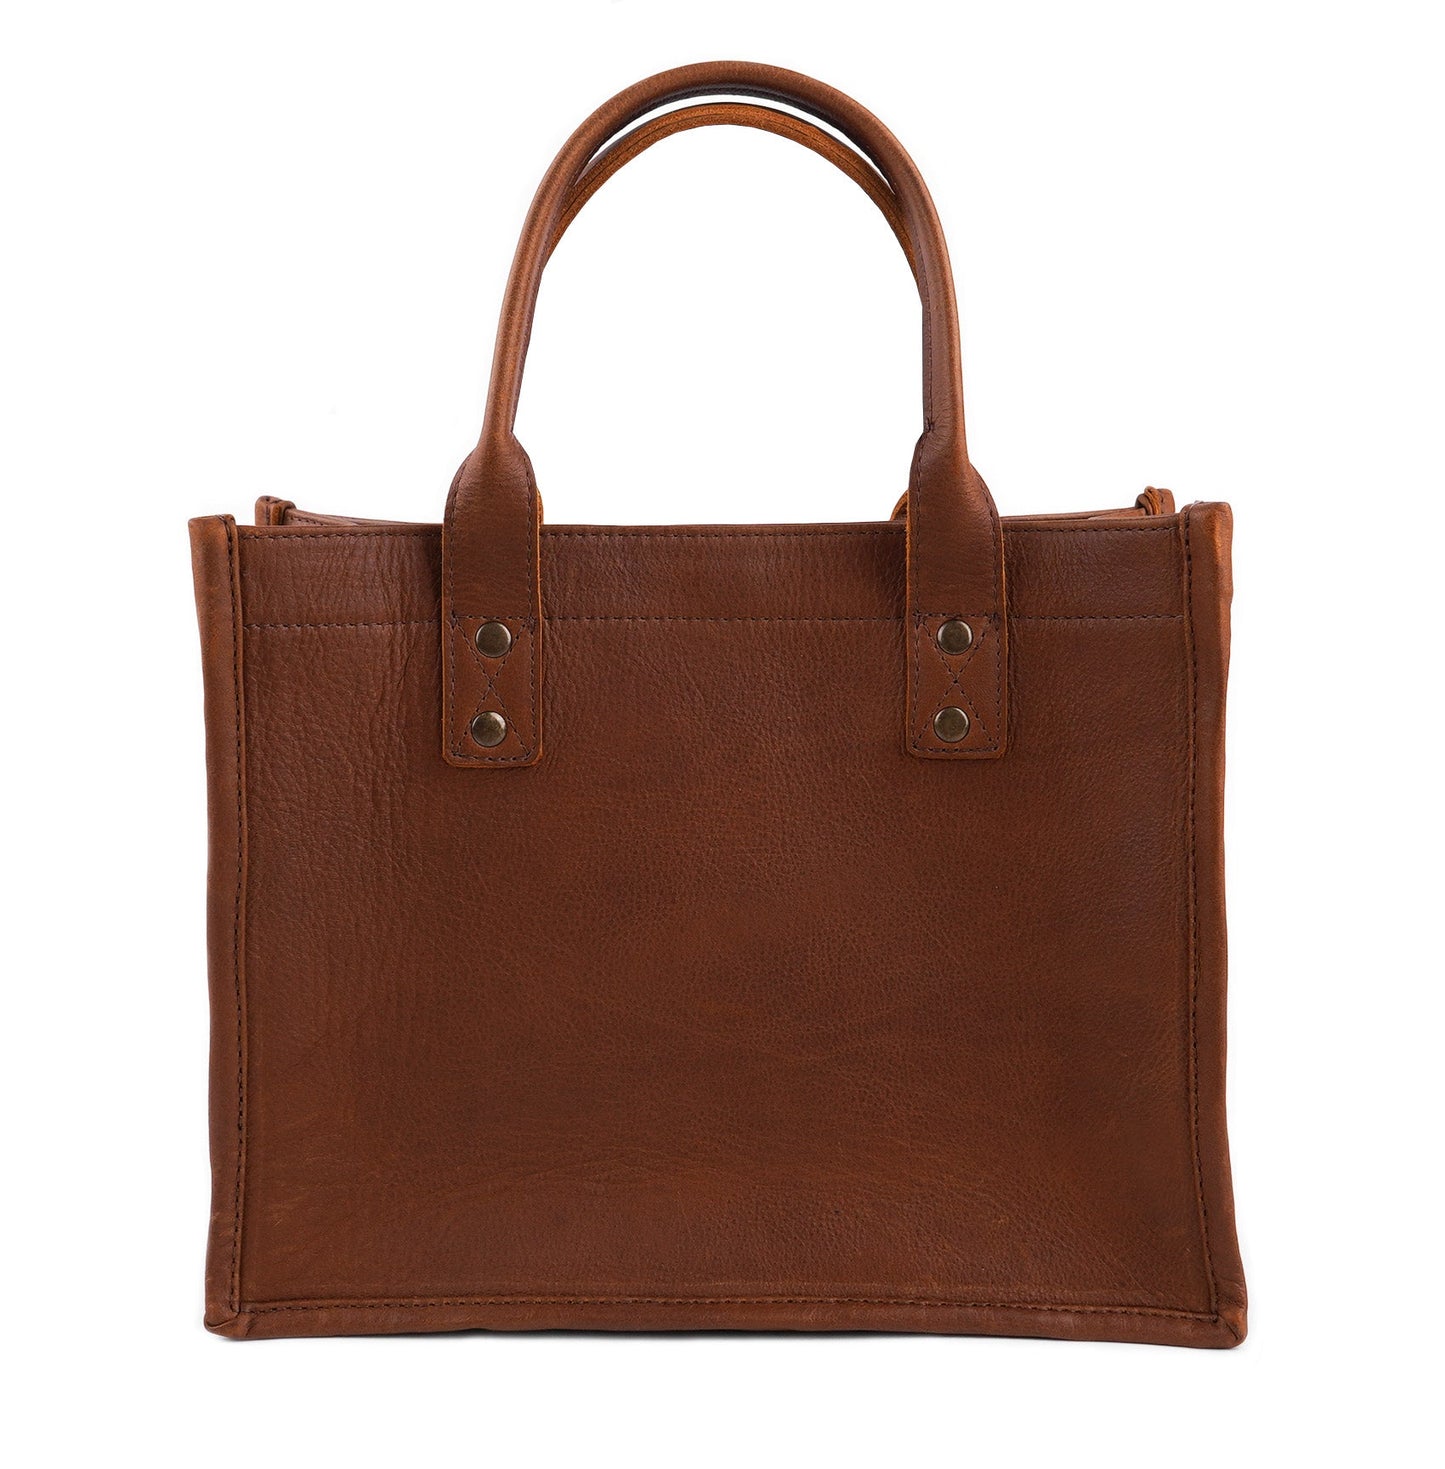 THE MEDIUM PERFECT TRAVEL TOTE - FULL LEATHER COLLECTION - CAFE